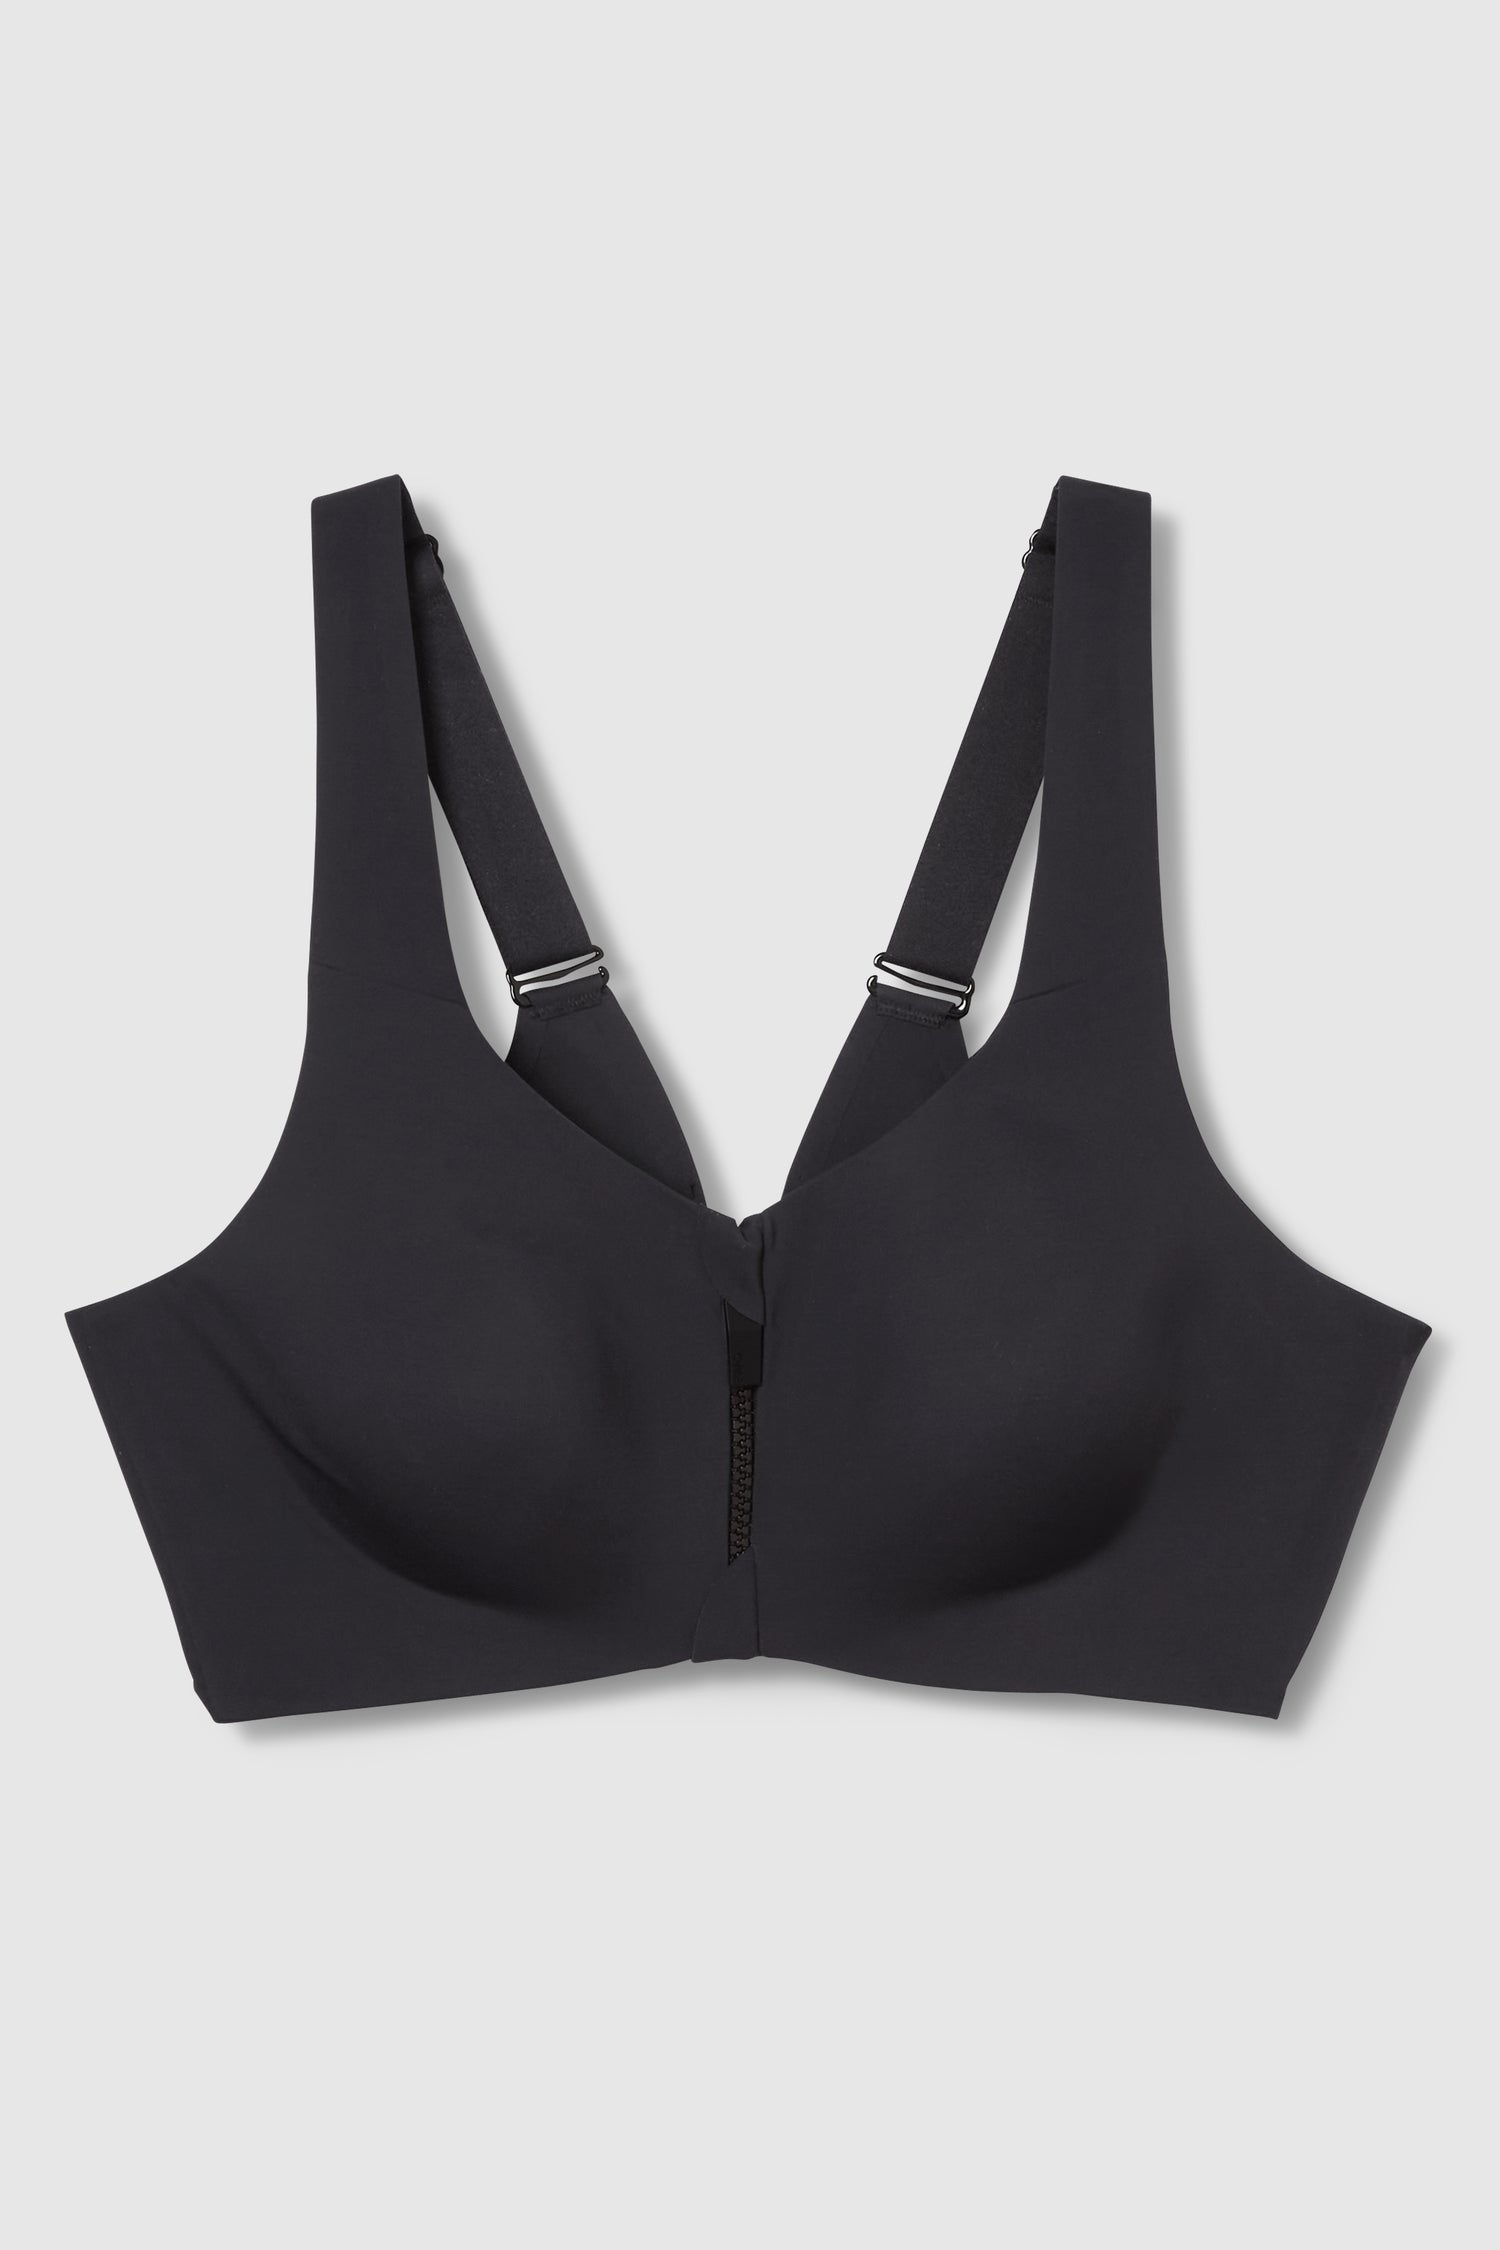 Buy ALAXENDRE High Impact Sports Bras for Women Free Size (28 till 34)  BLACK Online at Best Prices in India - JioMart.